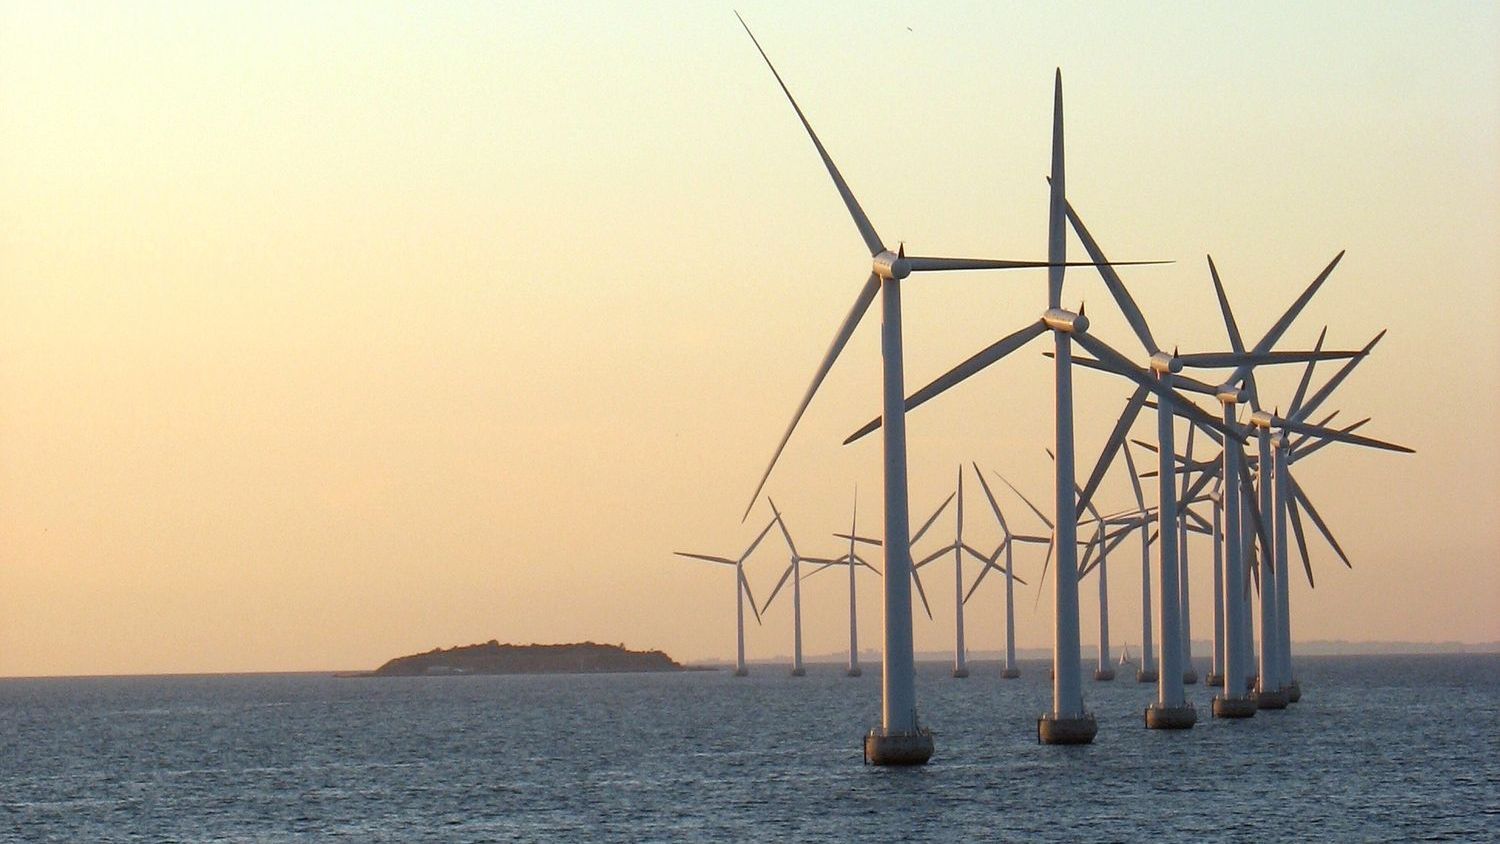 political economy of U.S. Offshore Wind